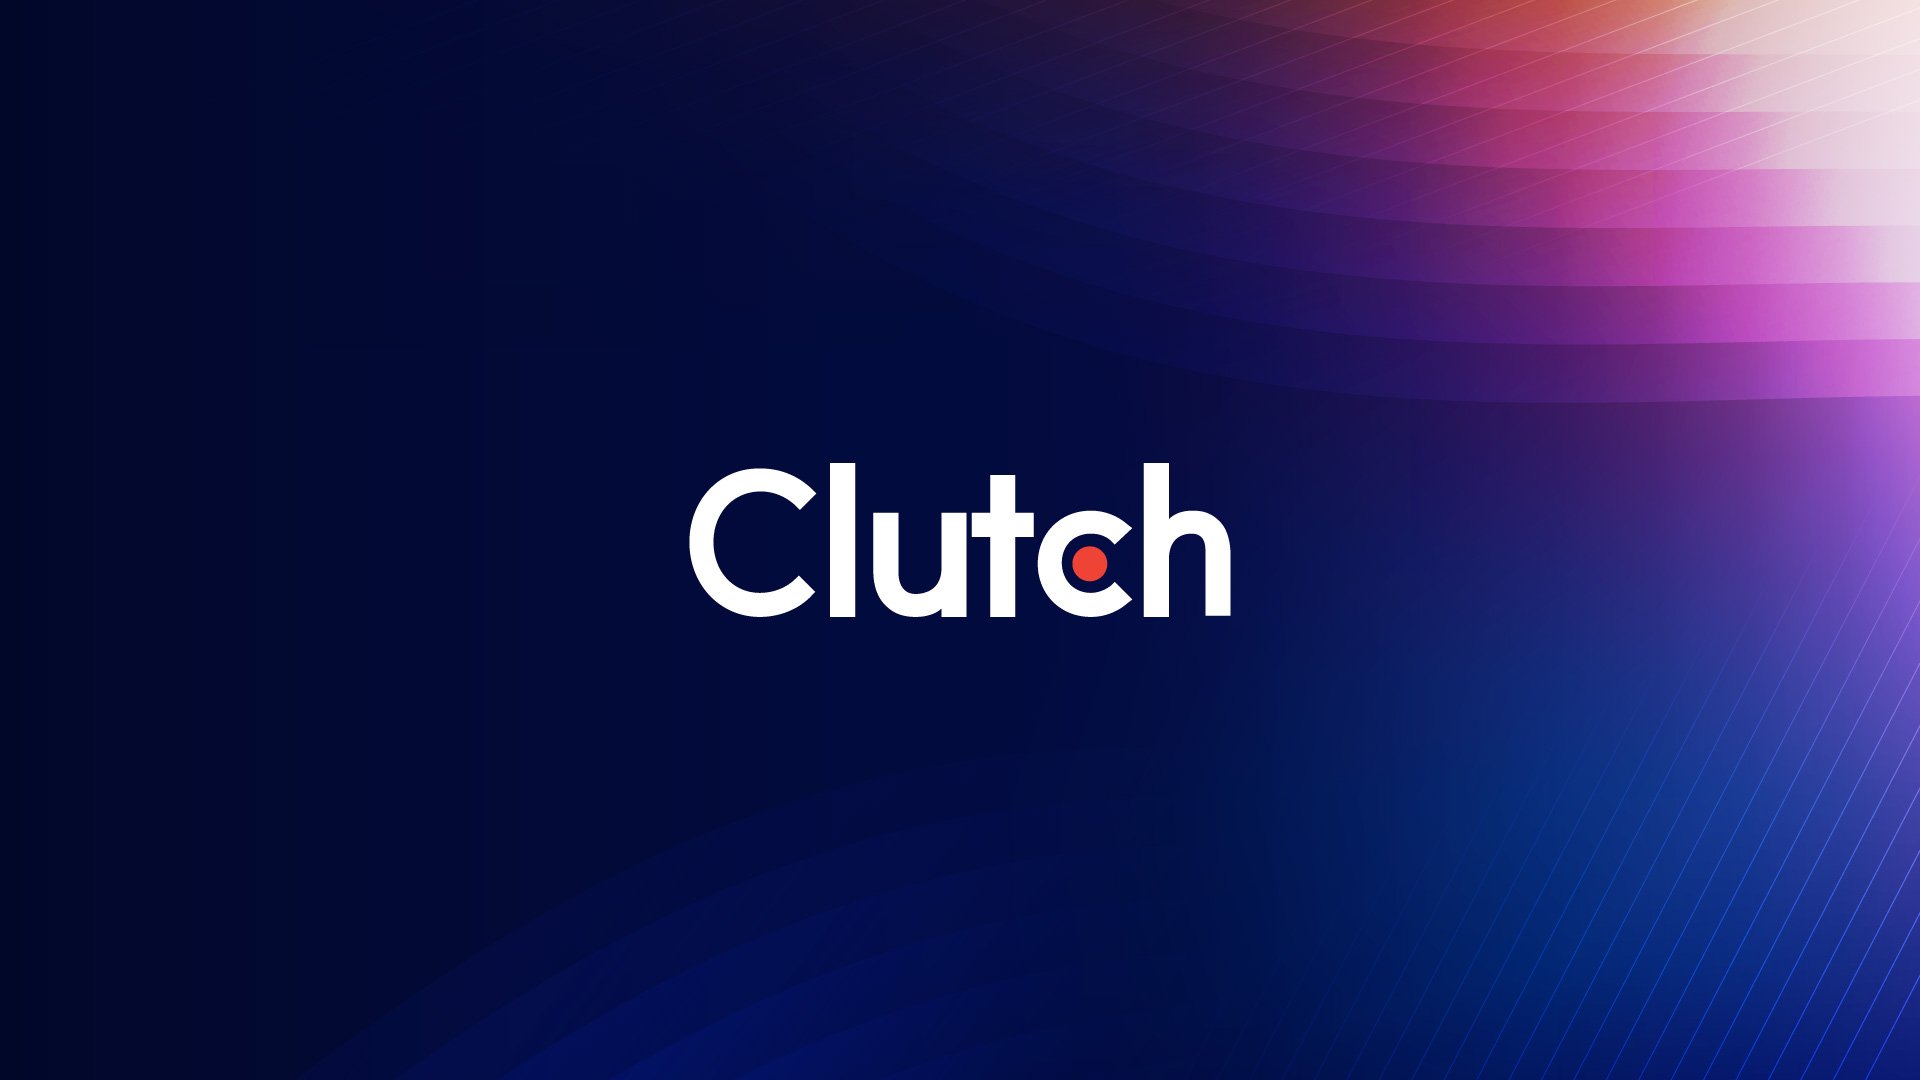 Clutch Announces that Cafeto is at the top of the ranking of Sustained Growth for 2022